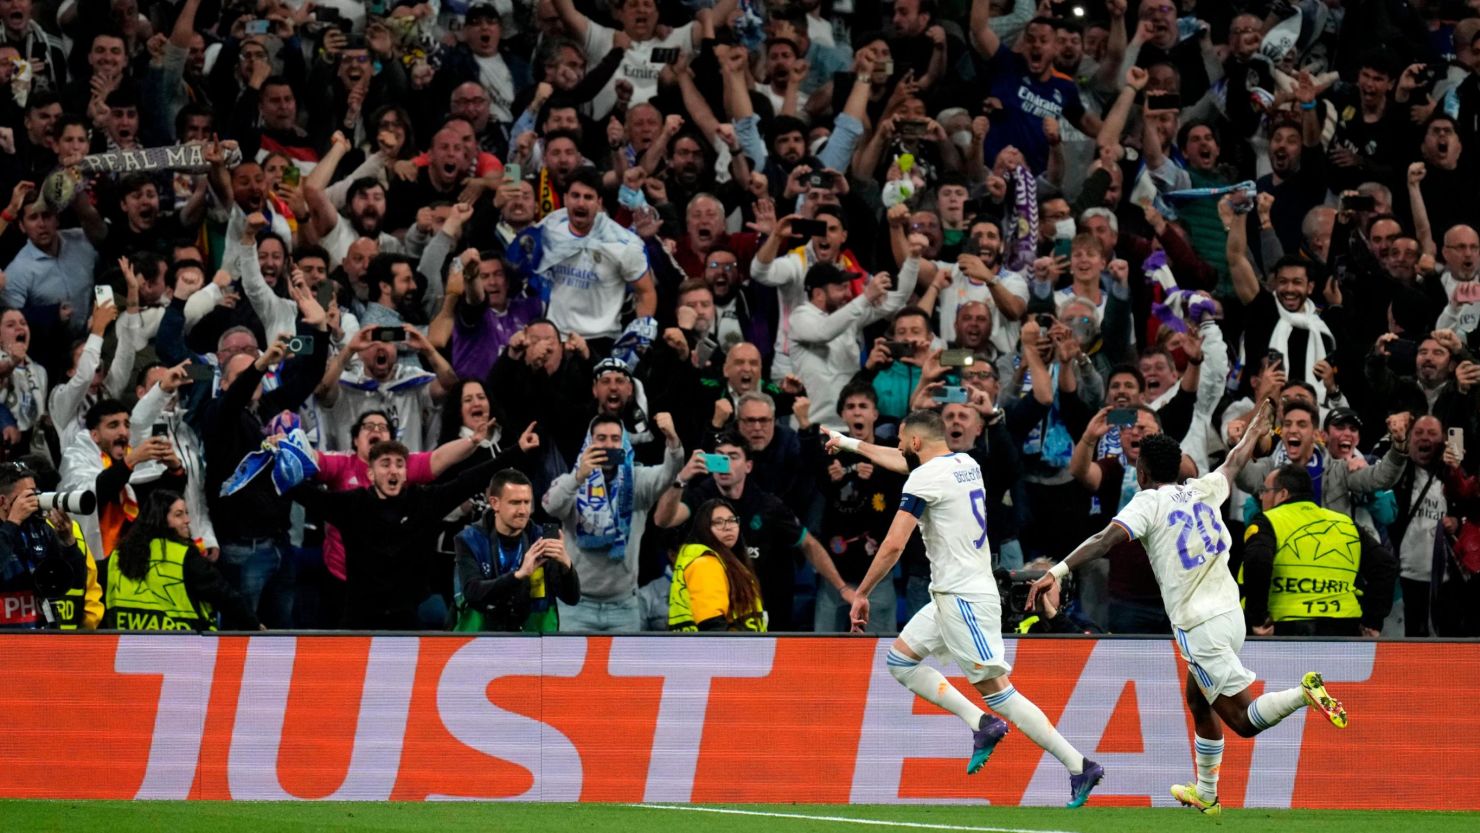 Karim Benzema scored the decisive goal in Real Madrid's Champions League semifinal against Manchester City.